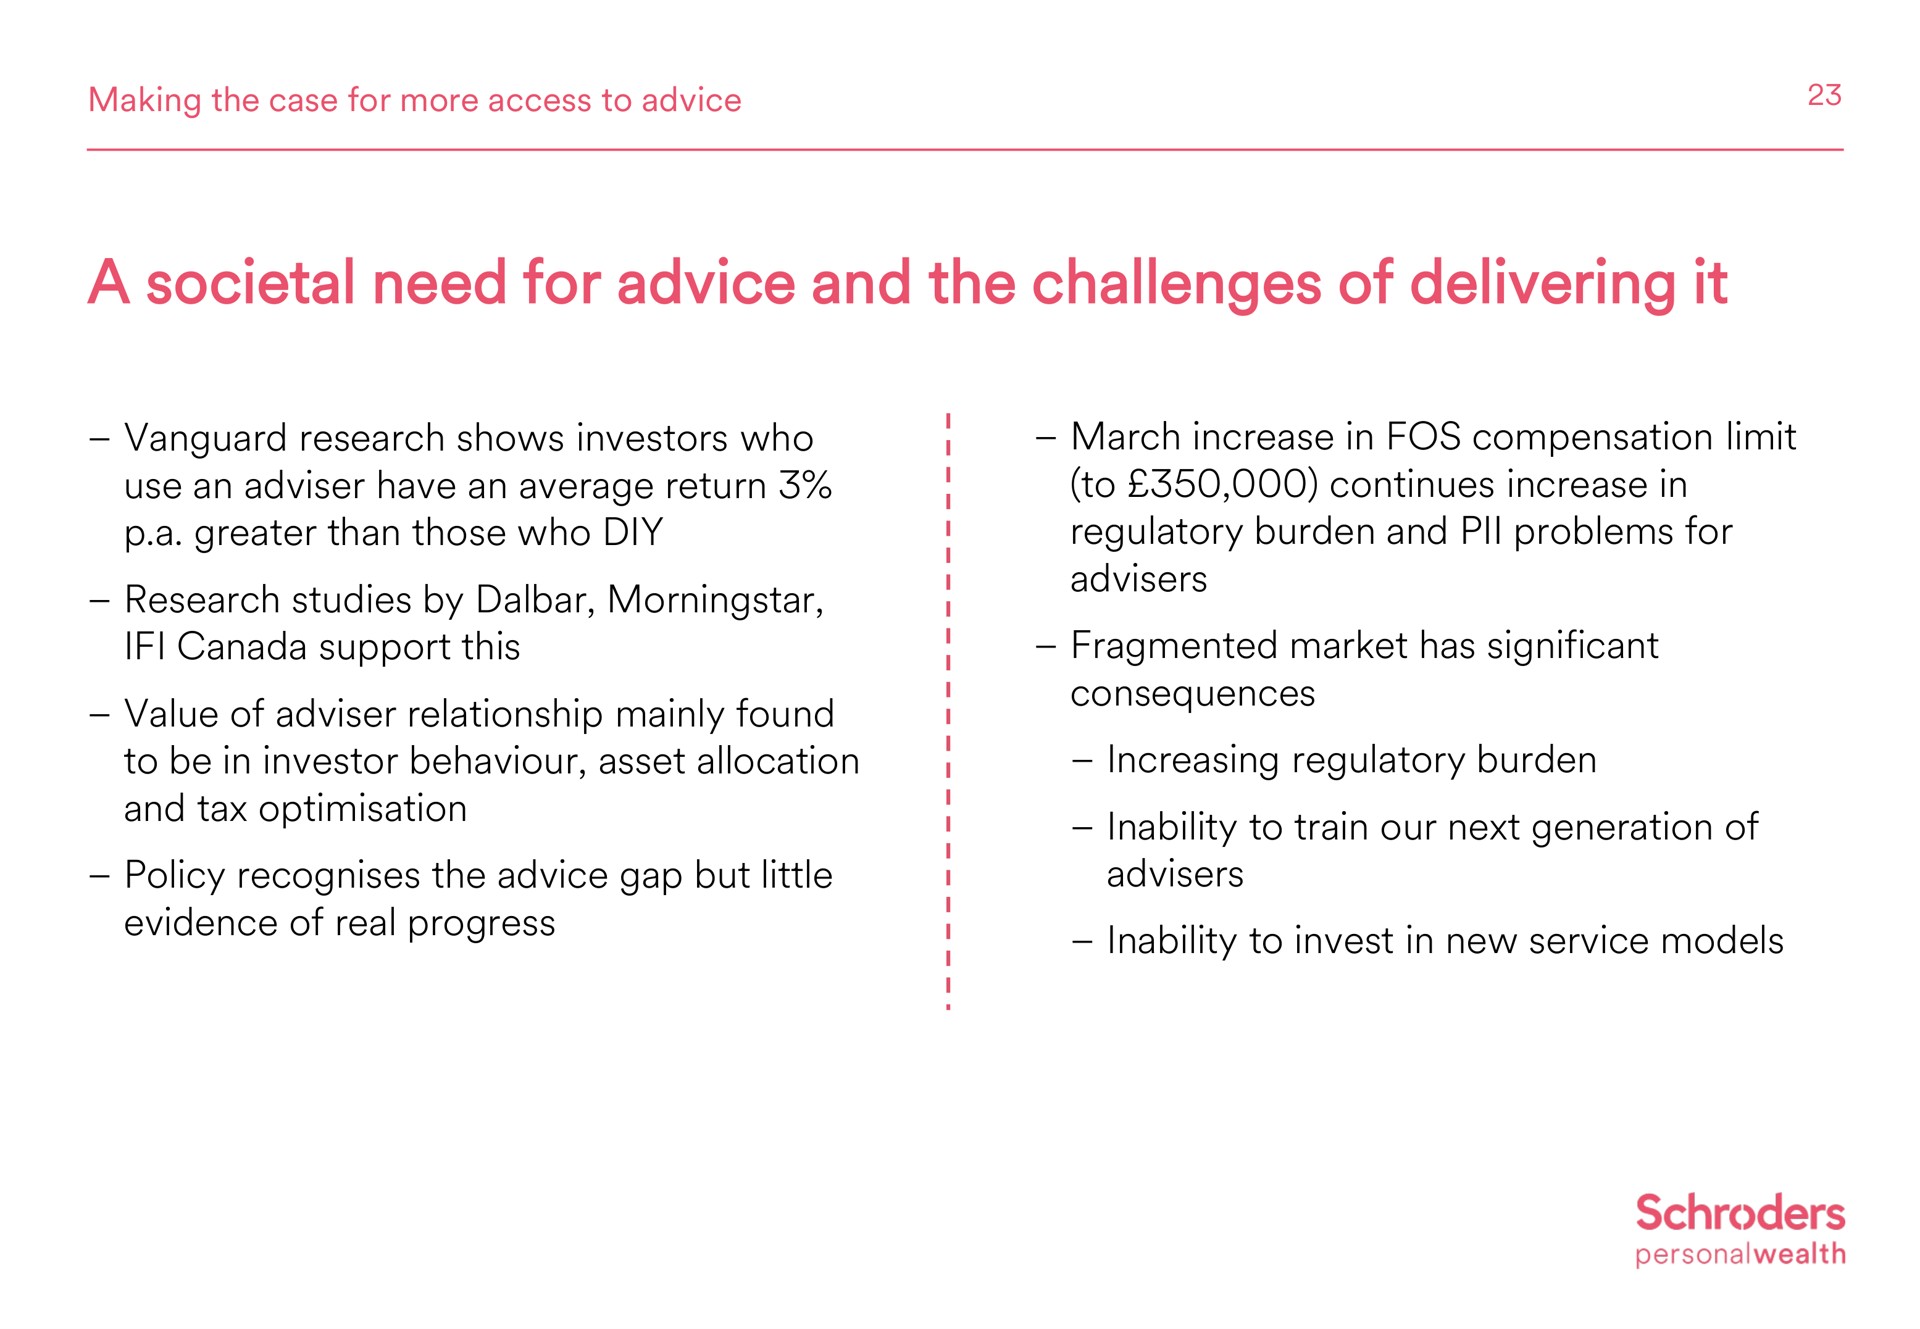 a societal need for advice and the challenges of delivering it | Schroders